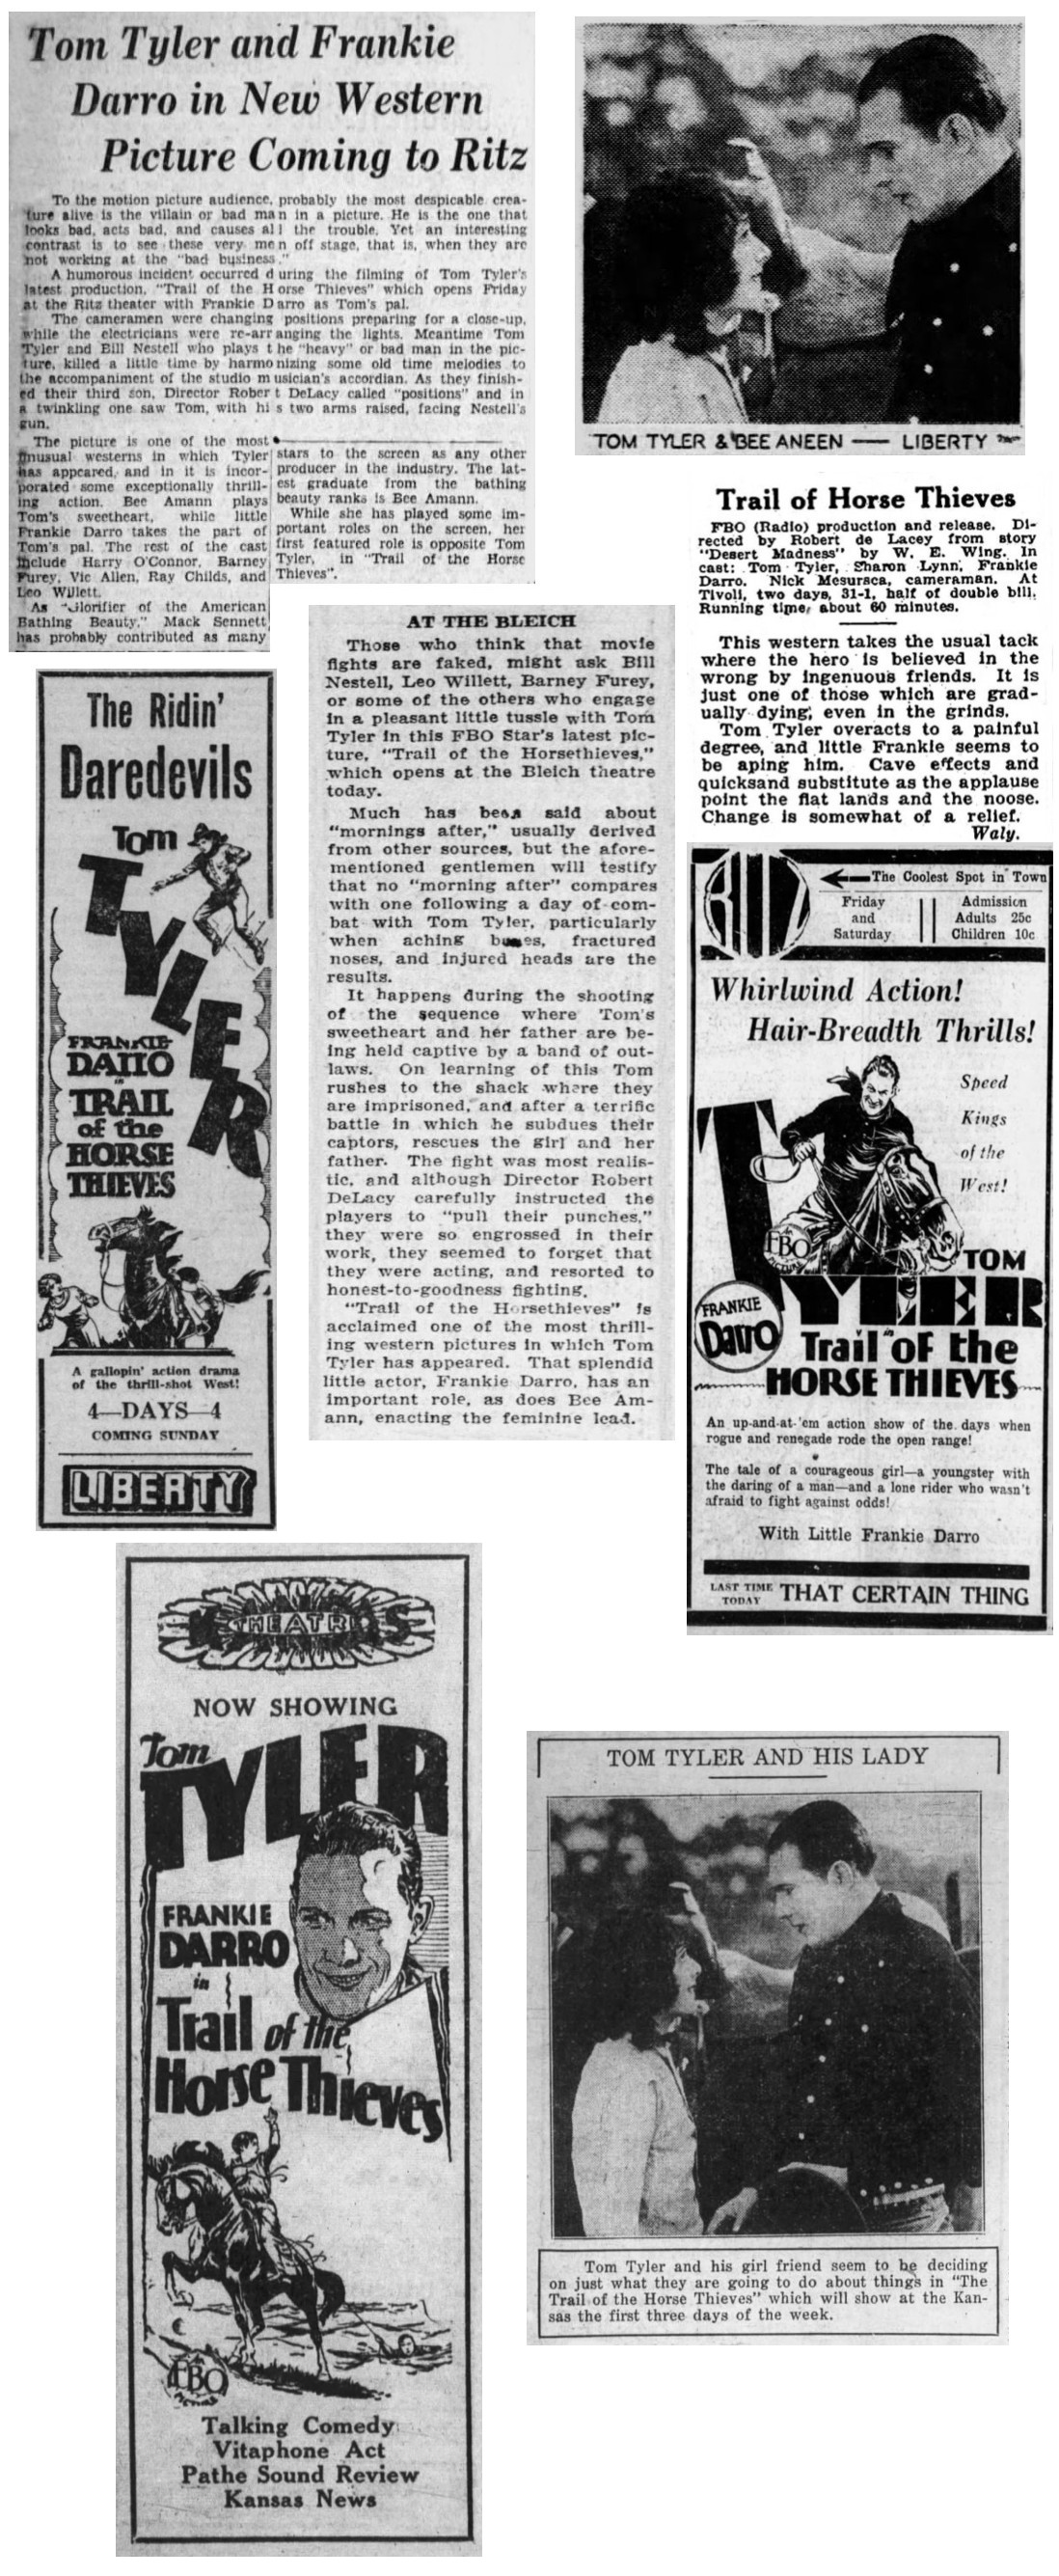 Trail of the Horse Thieves film reviews synopses cinema ads pictures of Tom